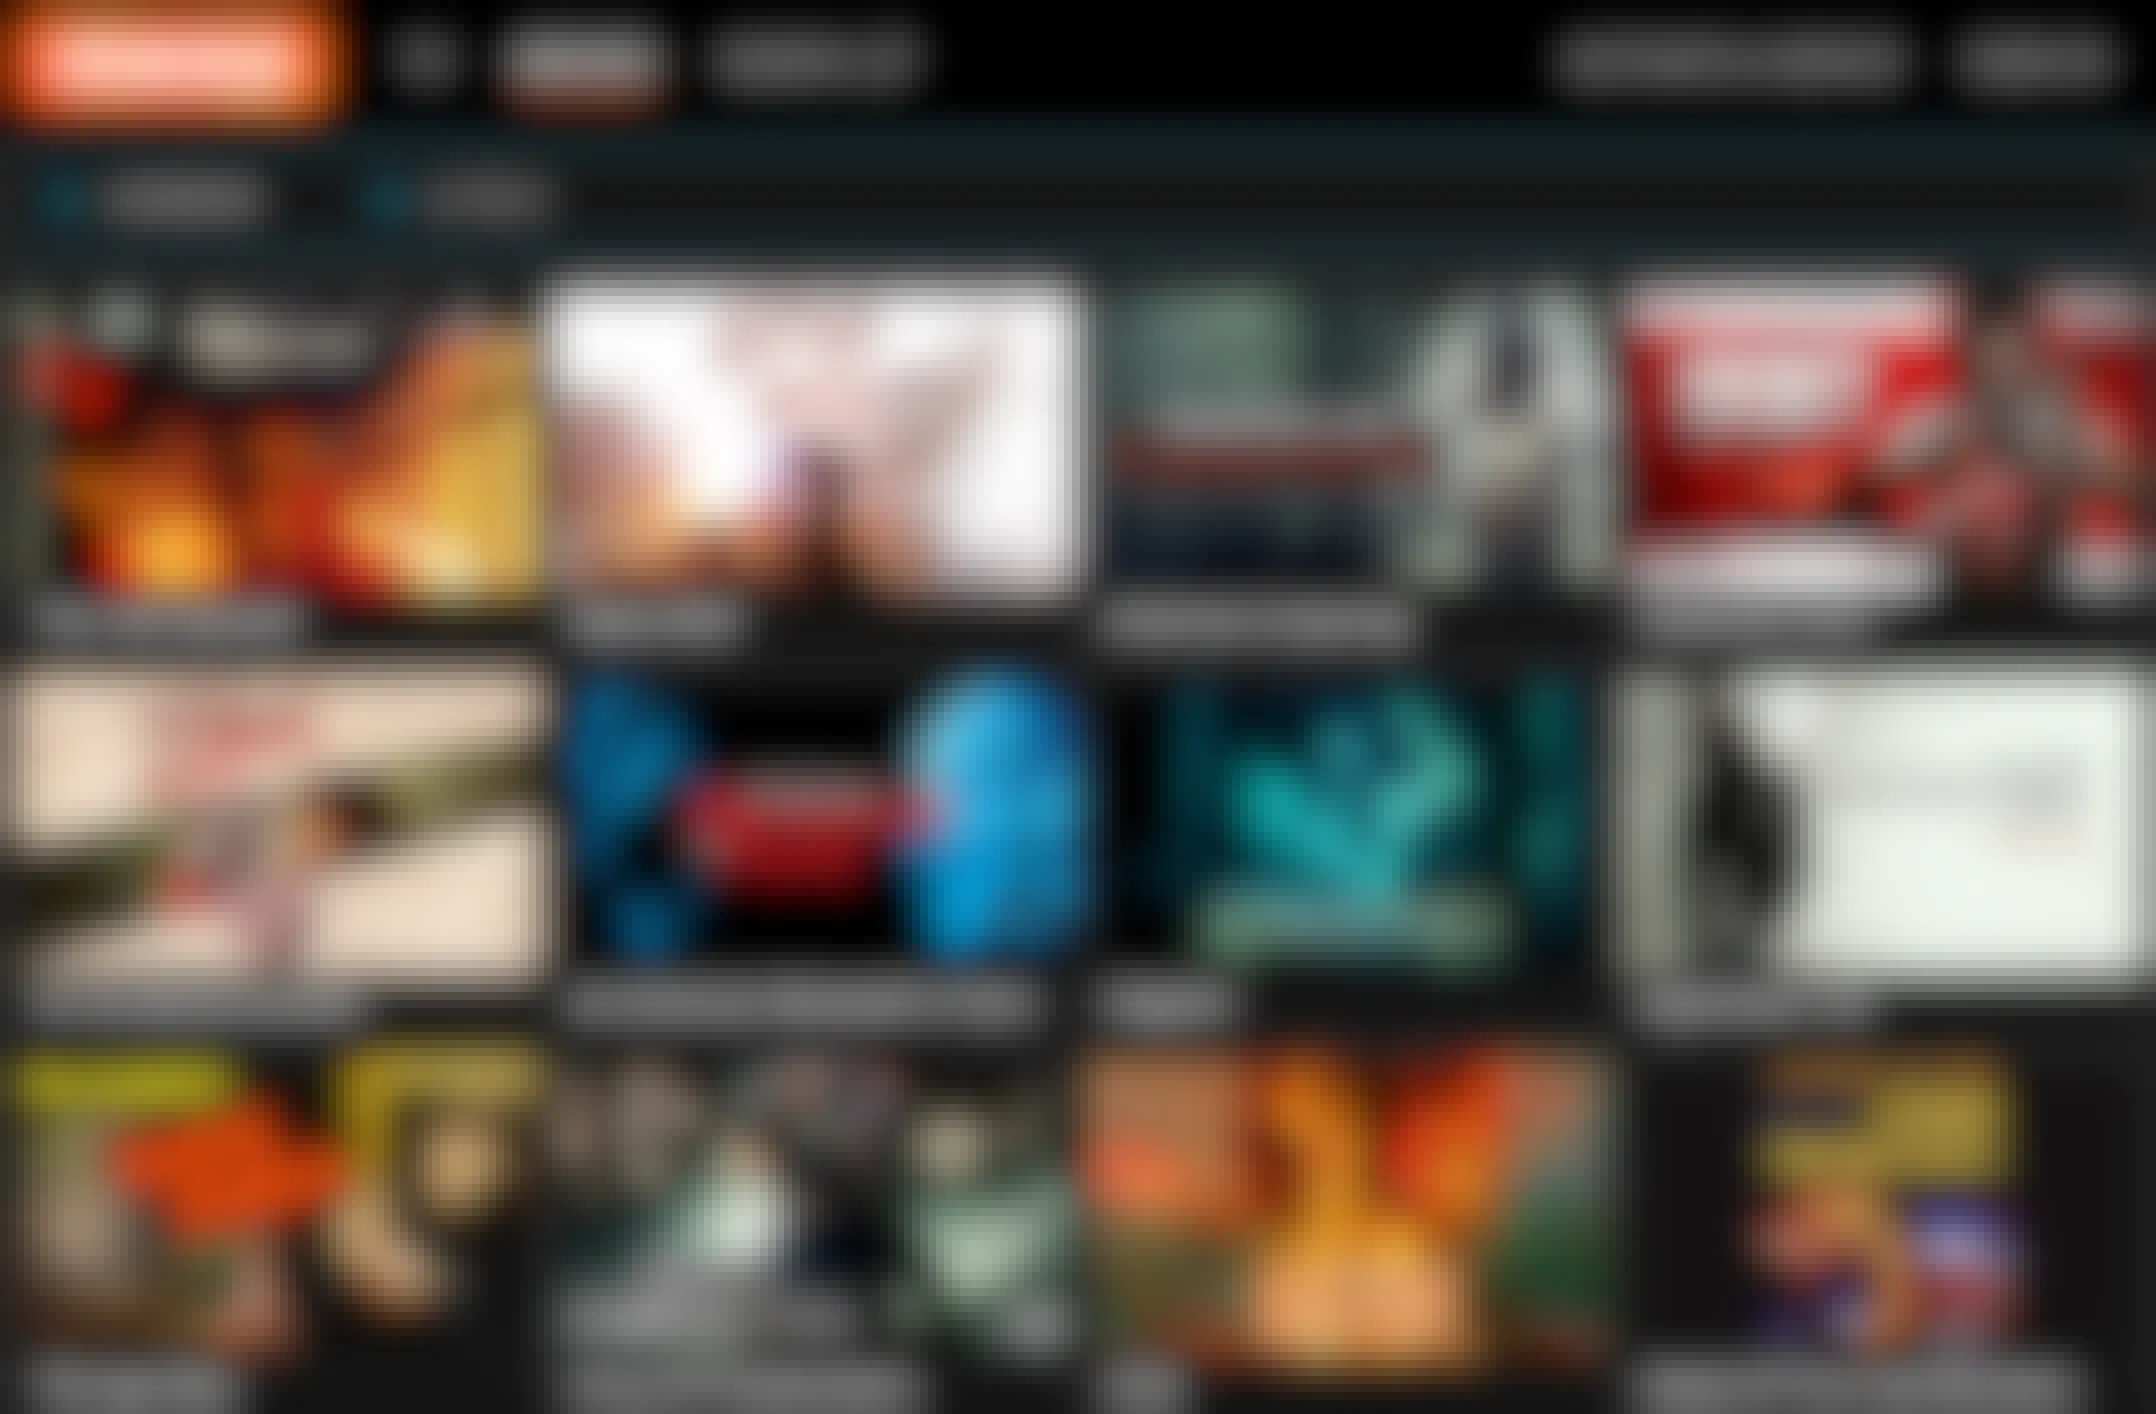 A screenshot of the horror movie selection on Crackle's website.